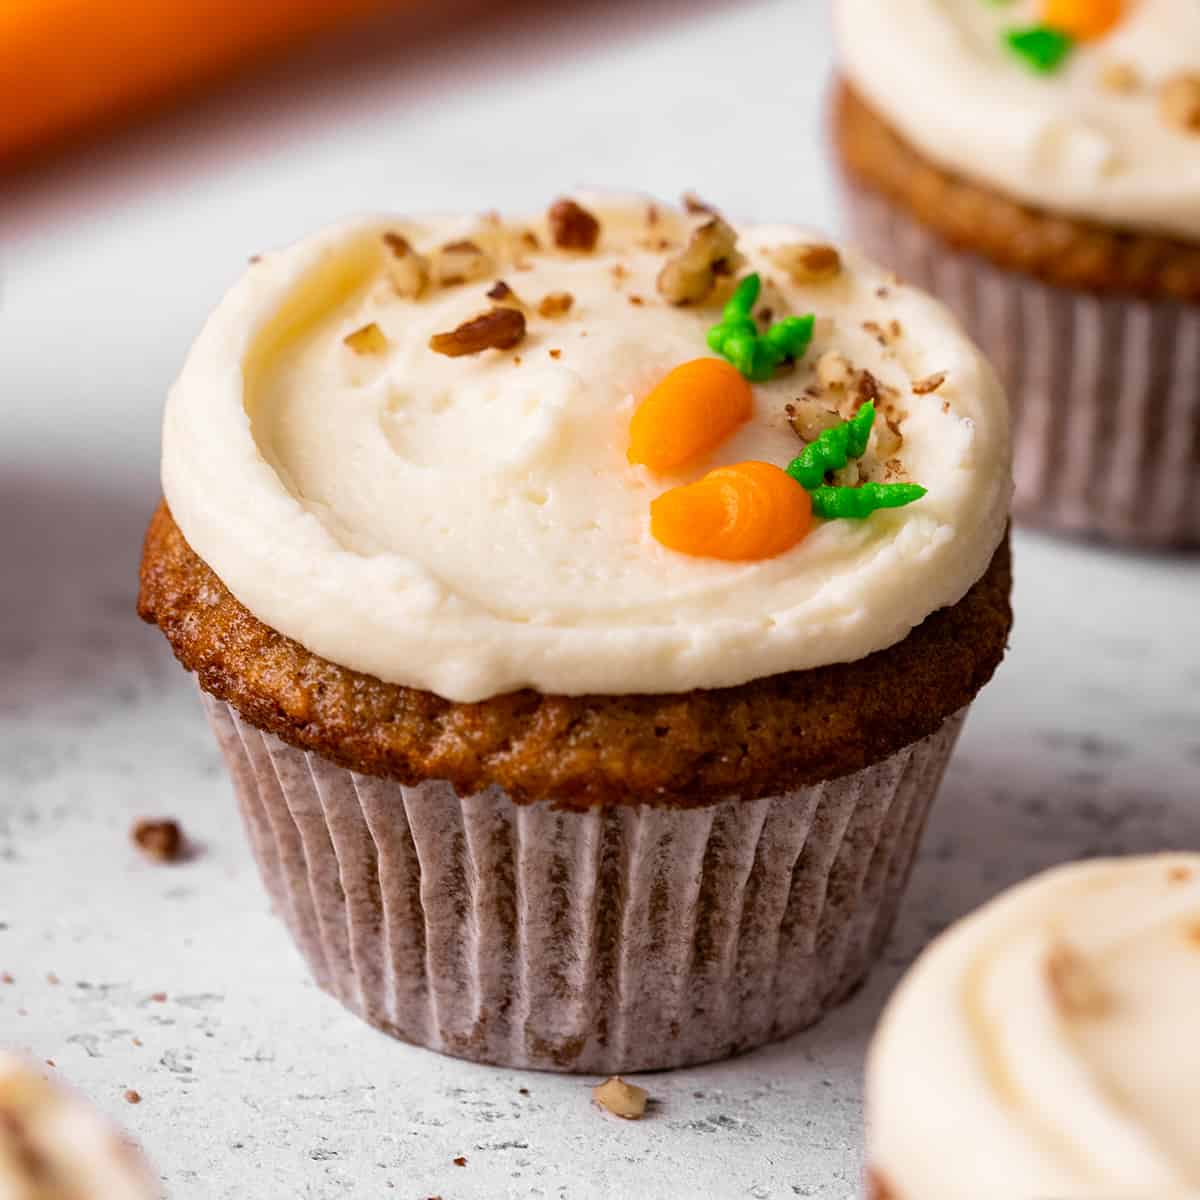 a Carrot Cake Cupcake decorated with nuts and piped frosting carrots